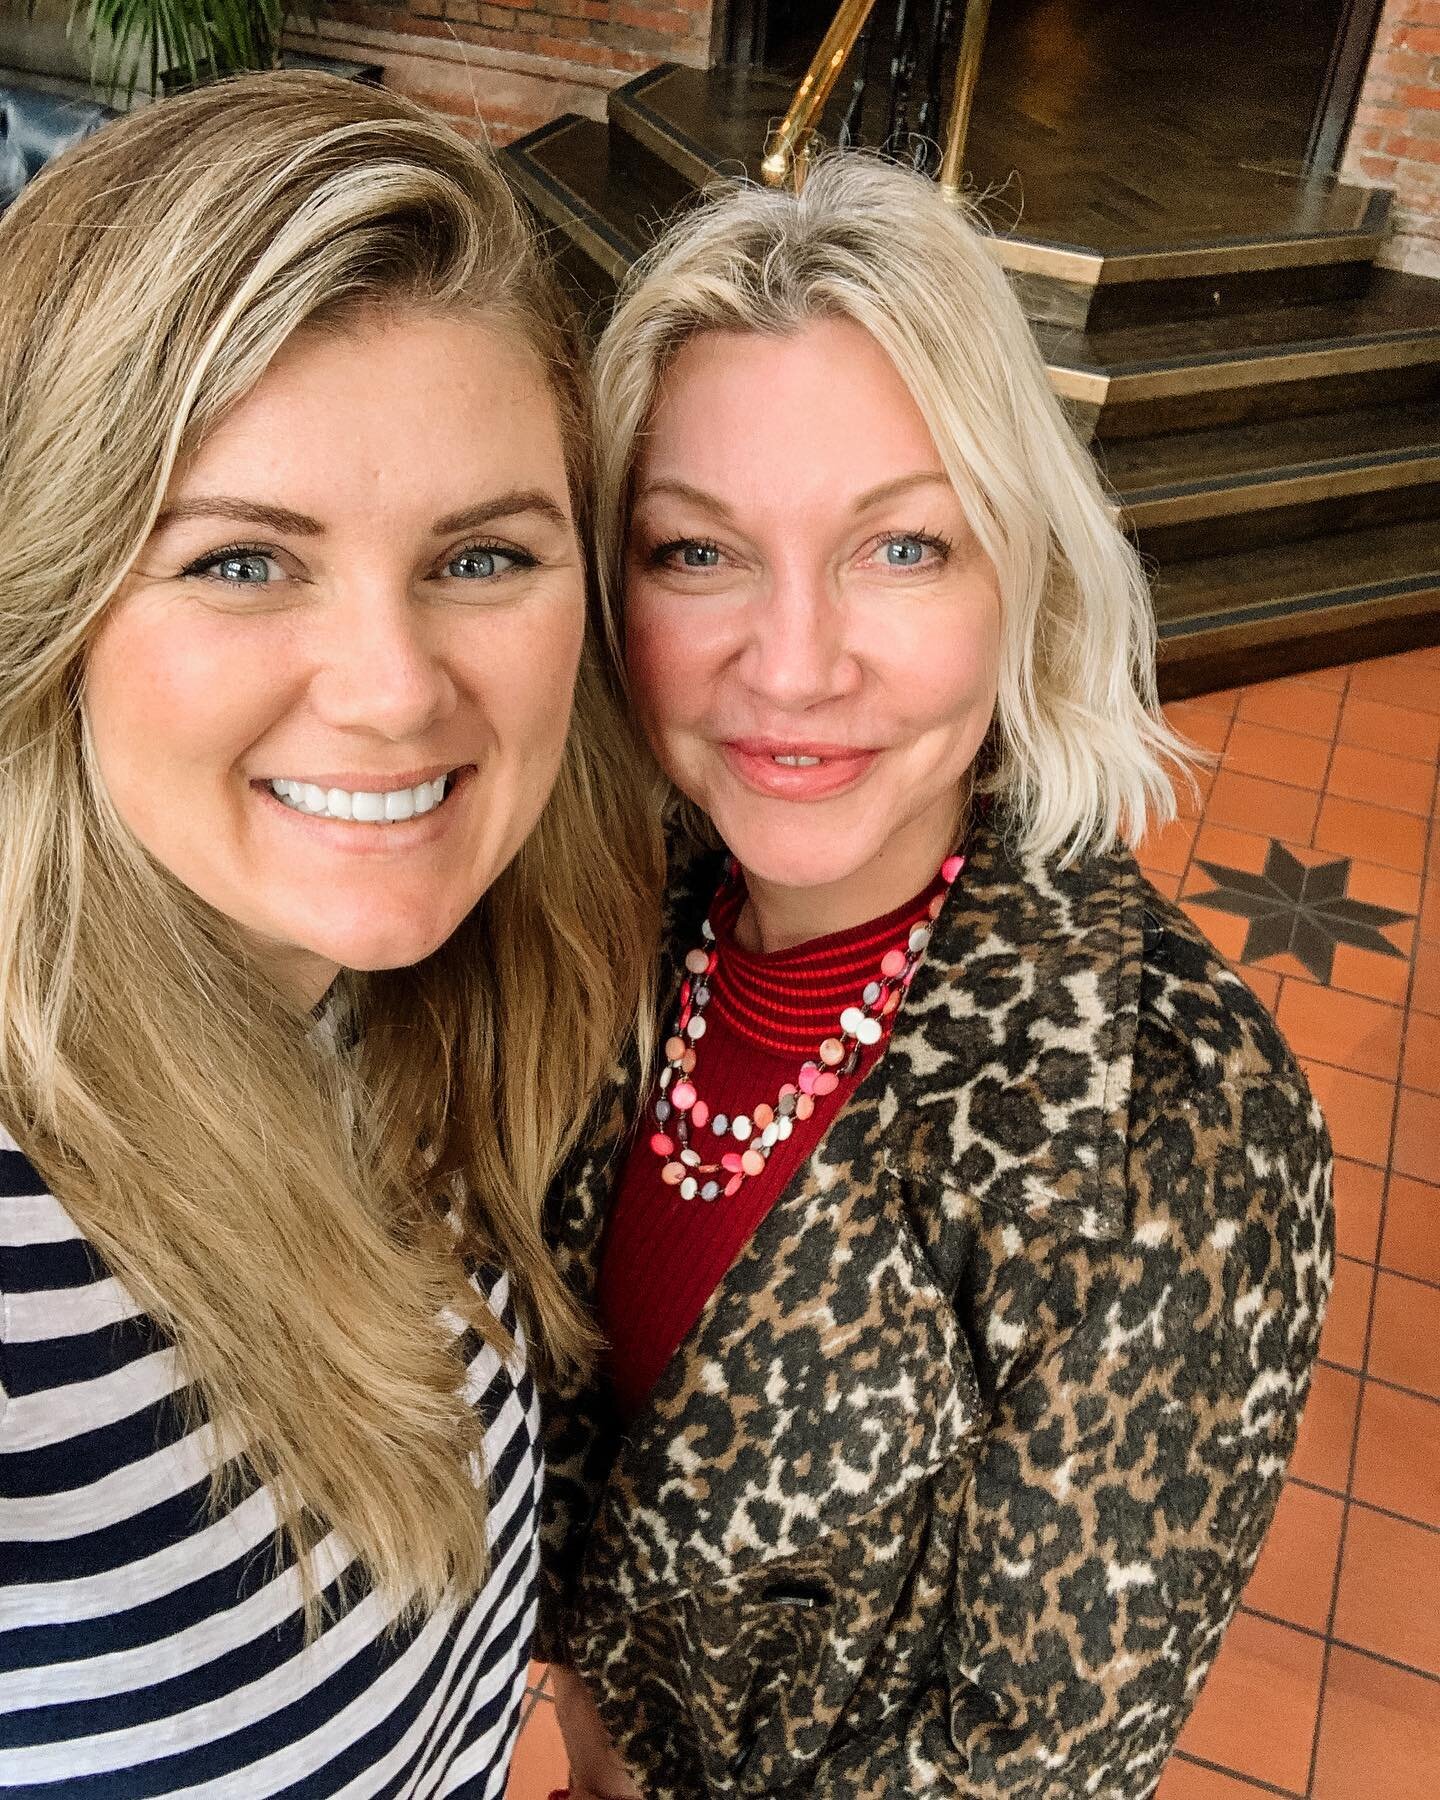 When two determined and passionate women get their heads together - amazing things are bound to happen. 🪄 

I am supper excited to confirm that Dalia Courridge Marketing will be sponsoring and offering strategic marketing support to Shelley at @leap